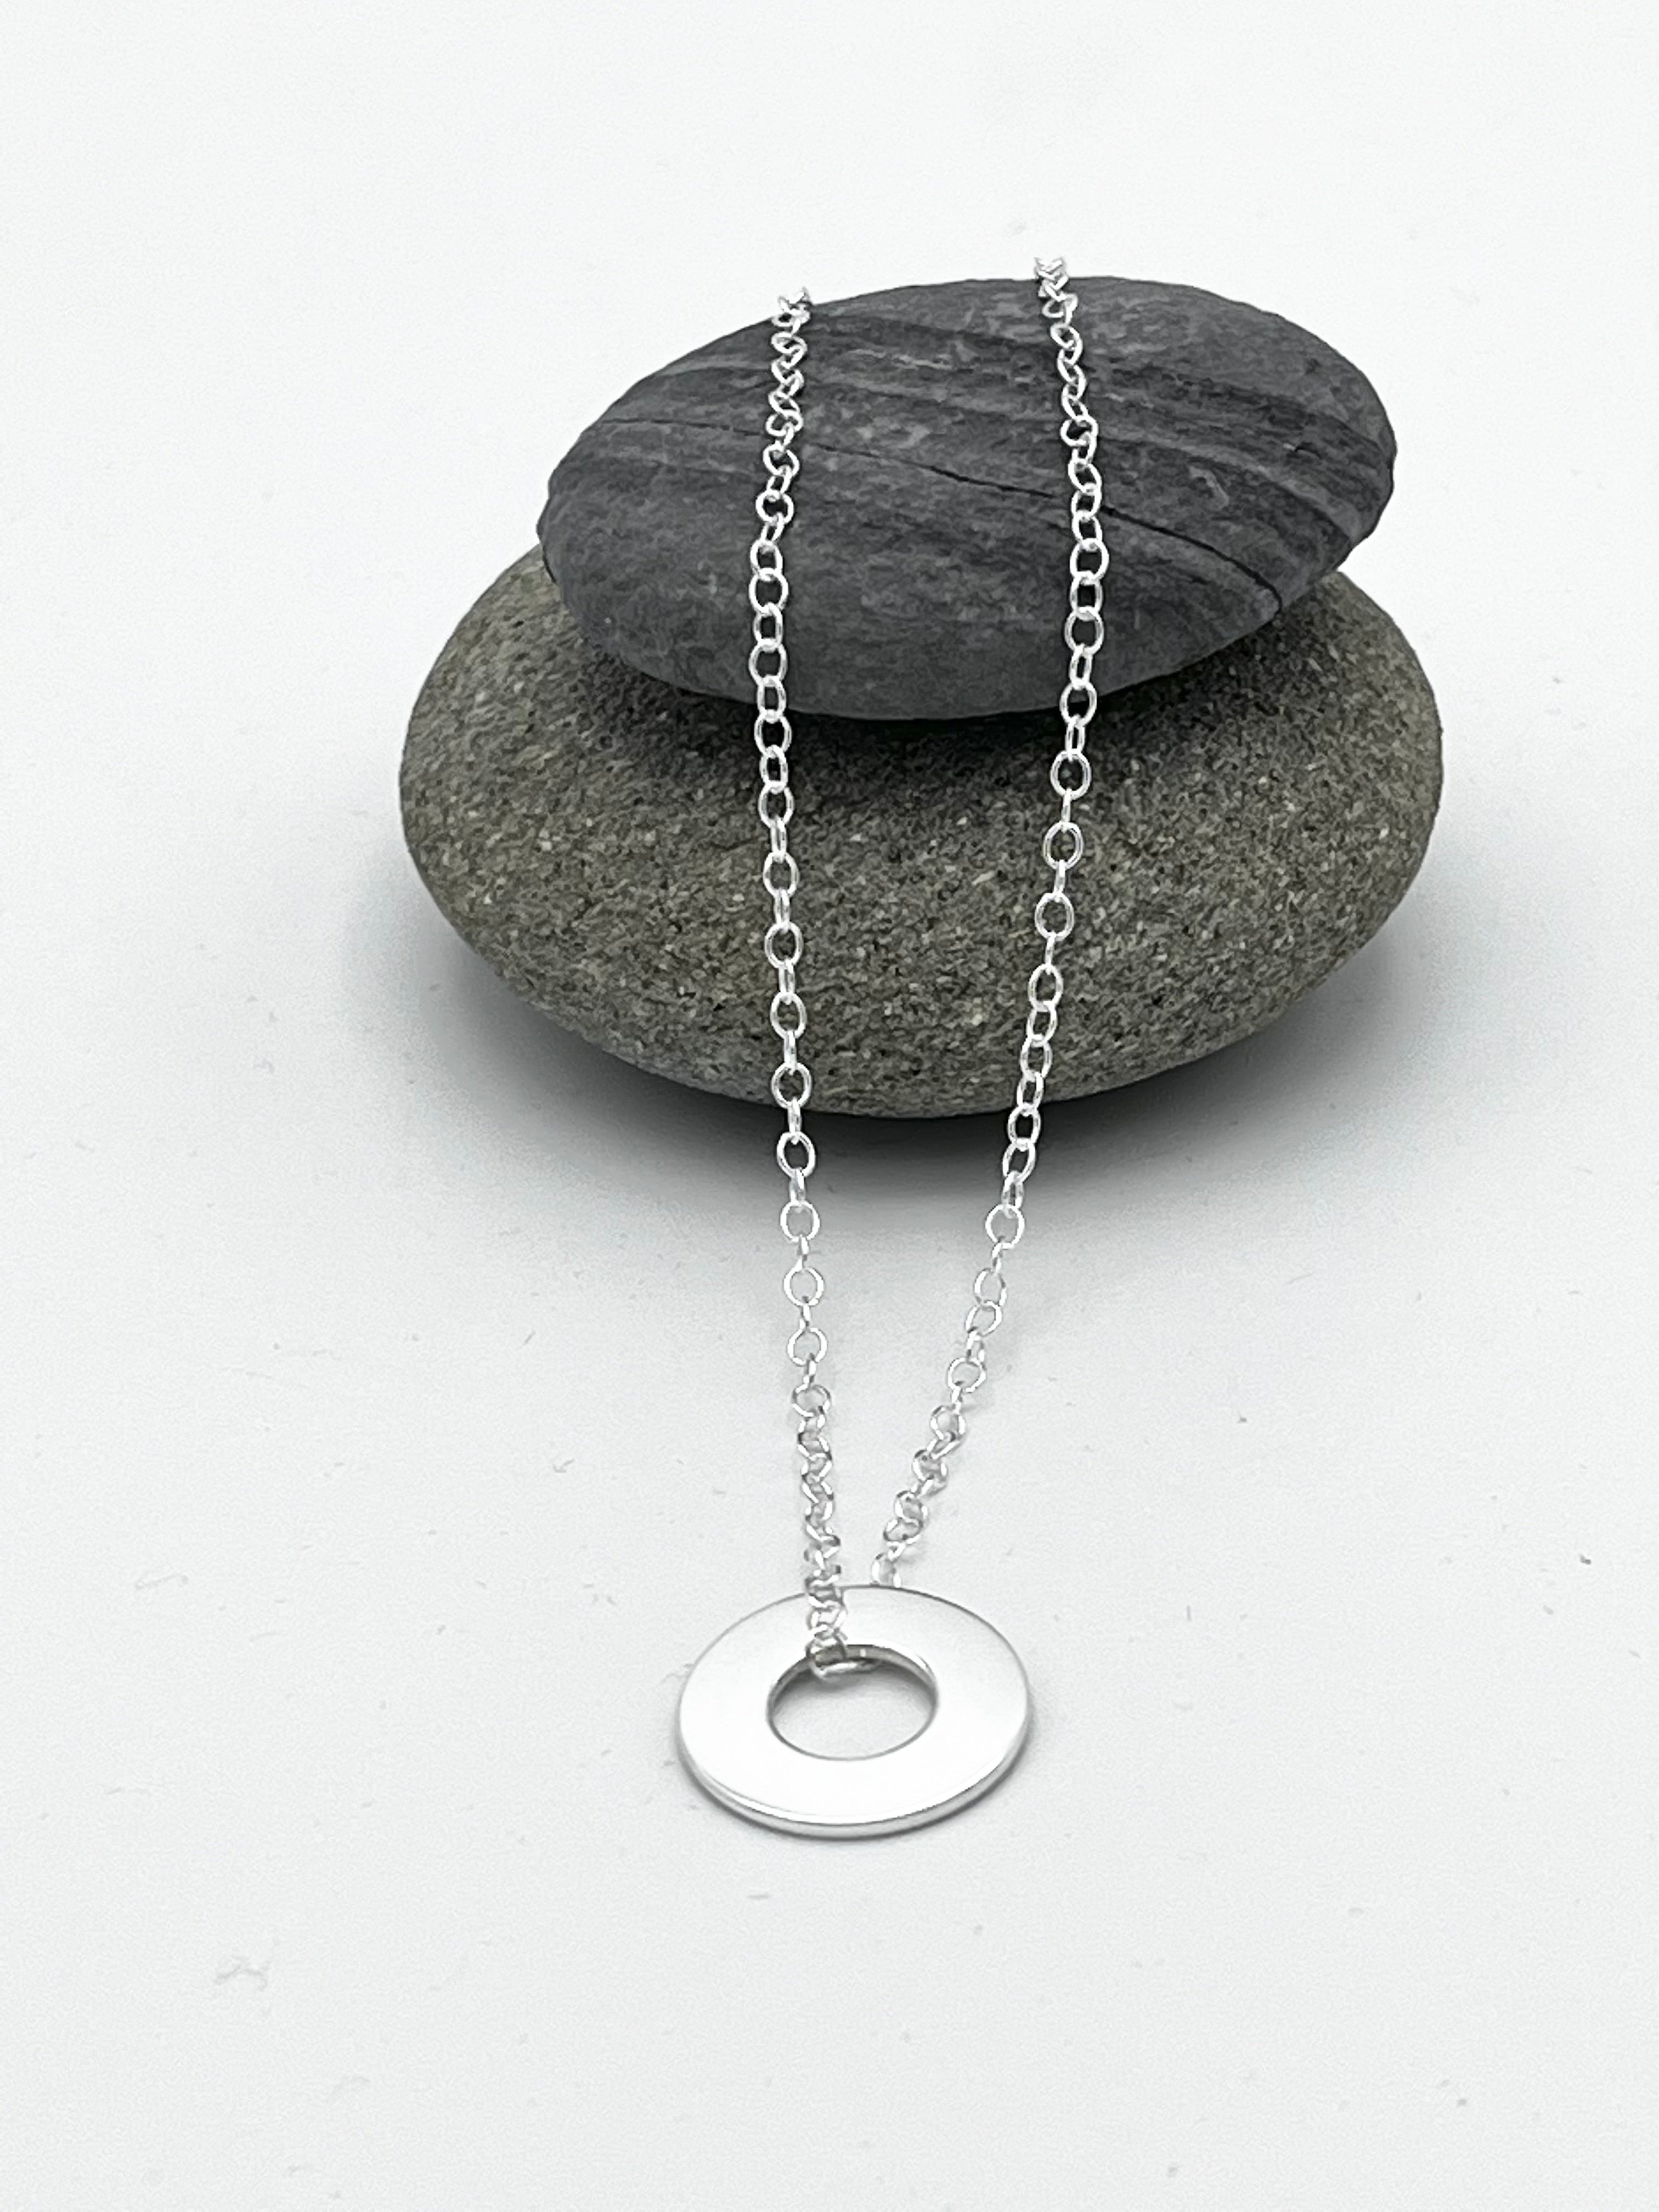 Washer pendant 15mm wide polished finish on 16" trace chain